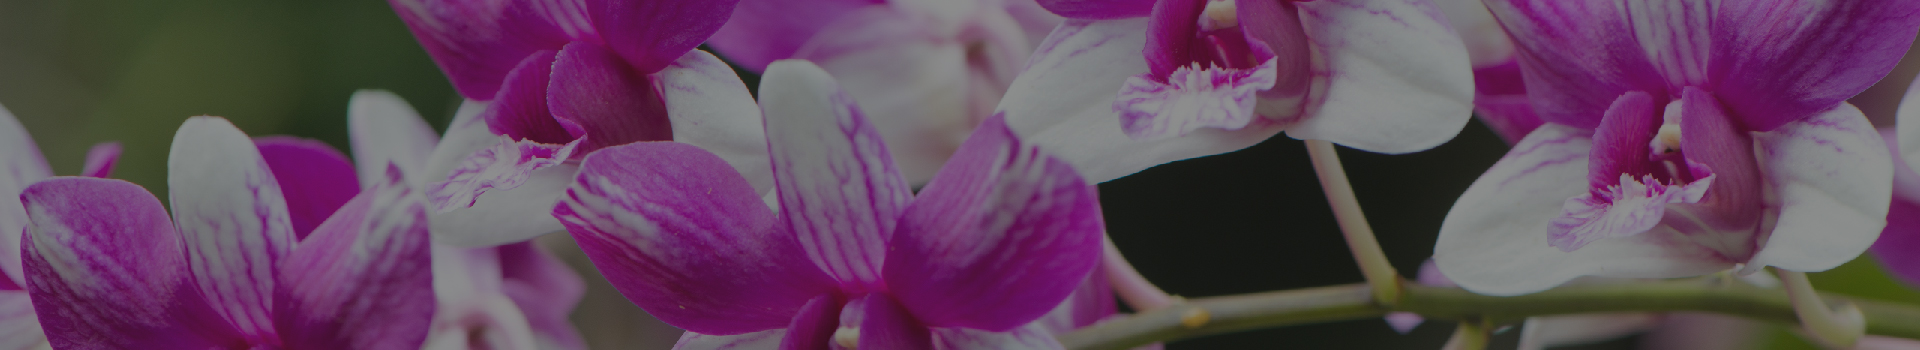 orchids banner